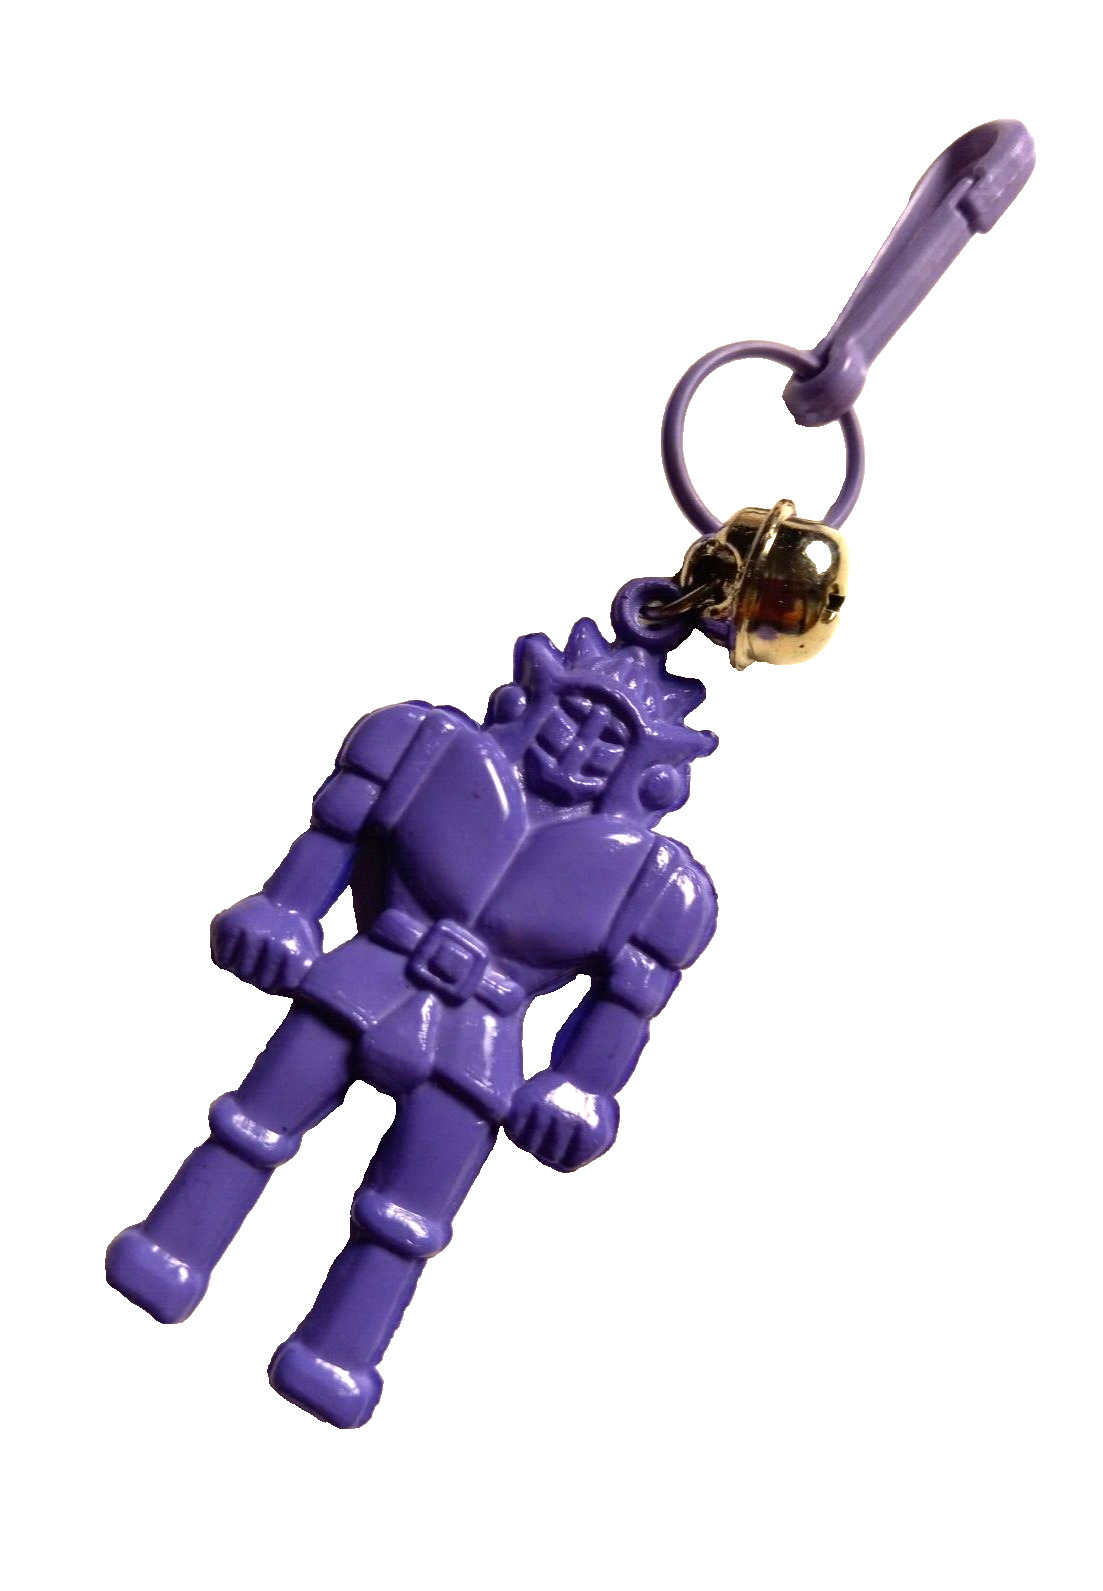 Charm 1980s Vintage Plastic Clip On Purple Robot for 80s Charms Necklace